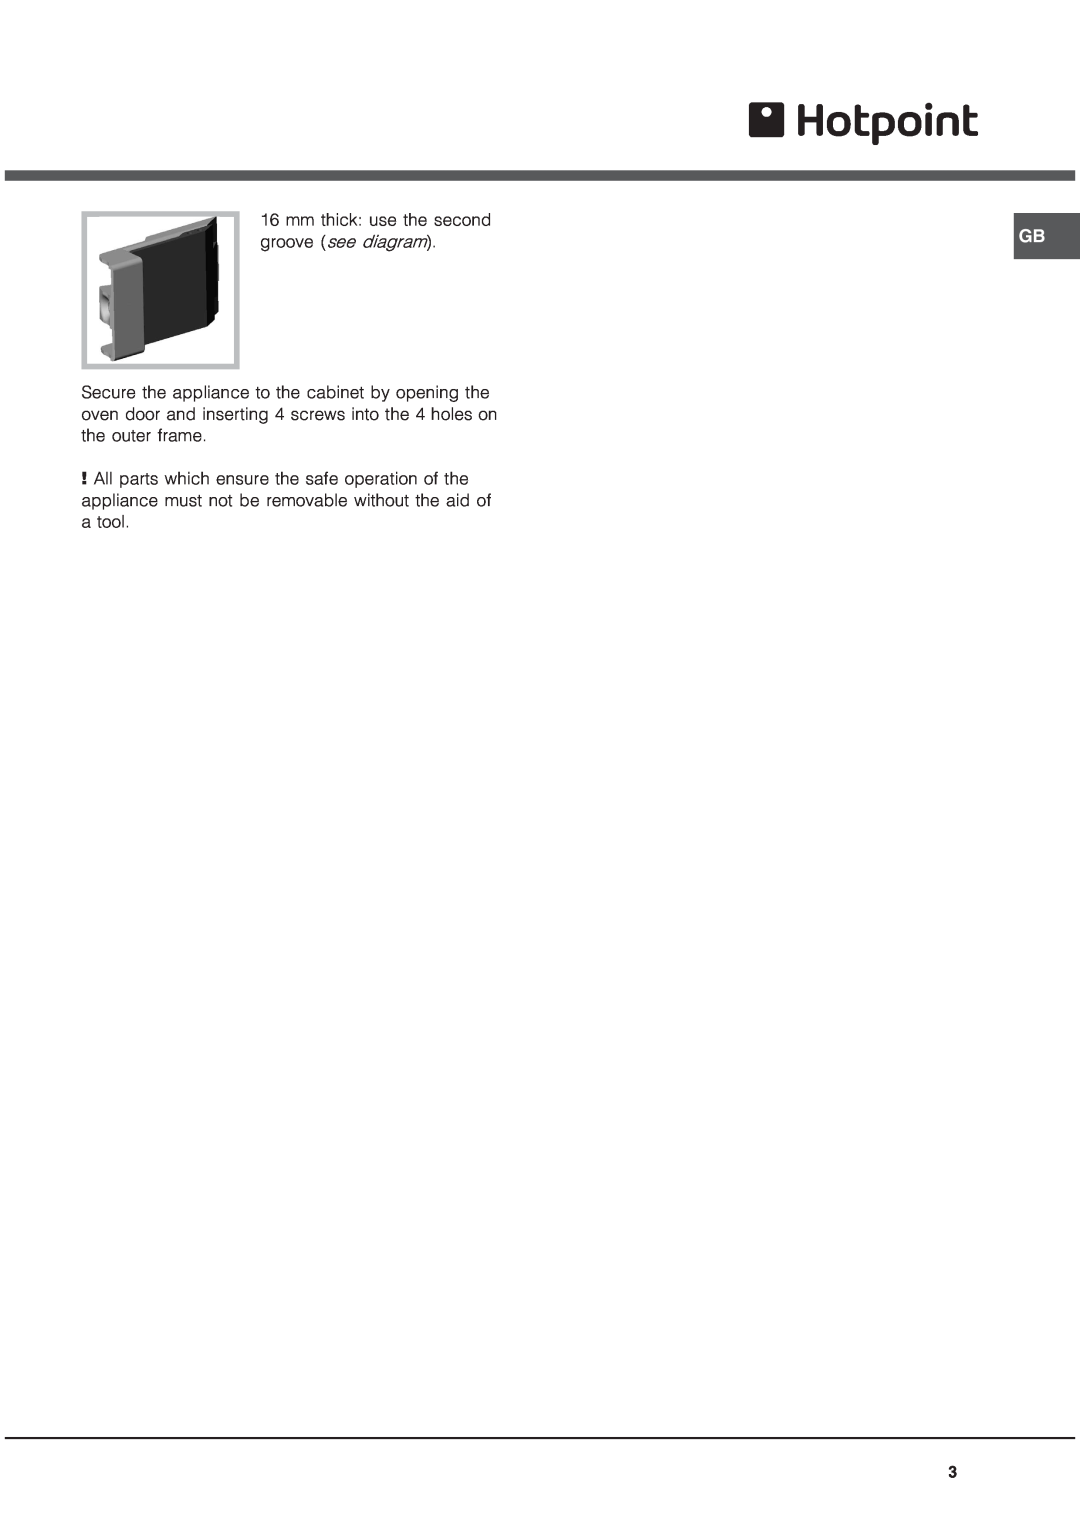 Hotpoint Oven, SE48101PX, SE48101PGX operating instructions mm thick use the second, groove see diagram 